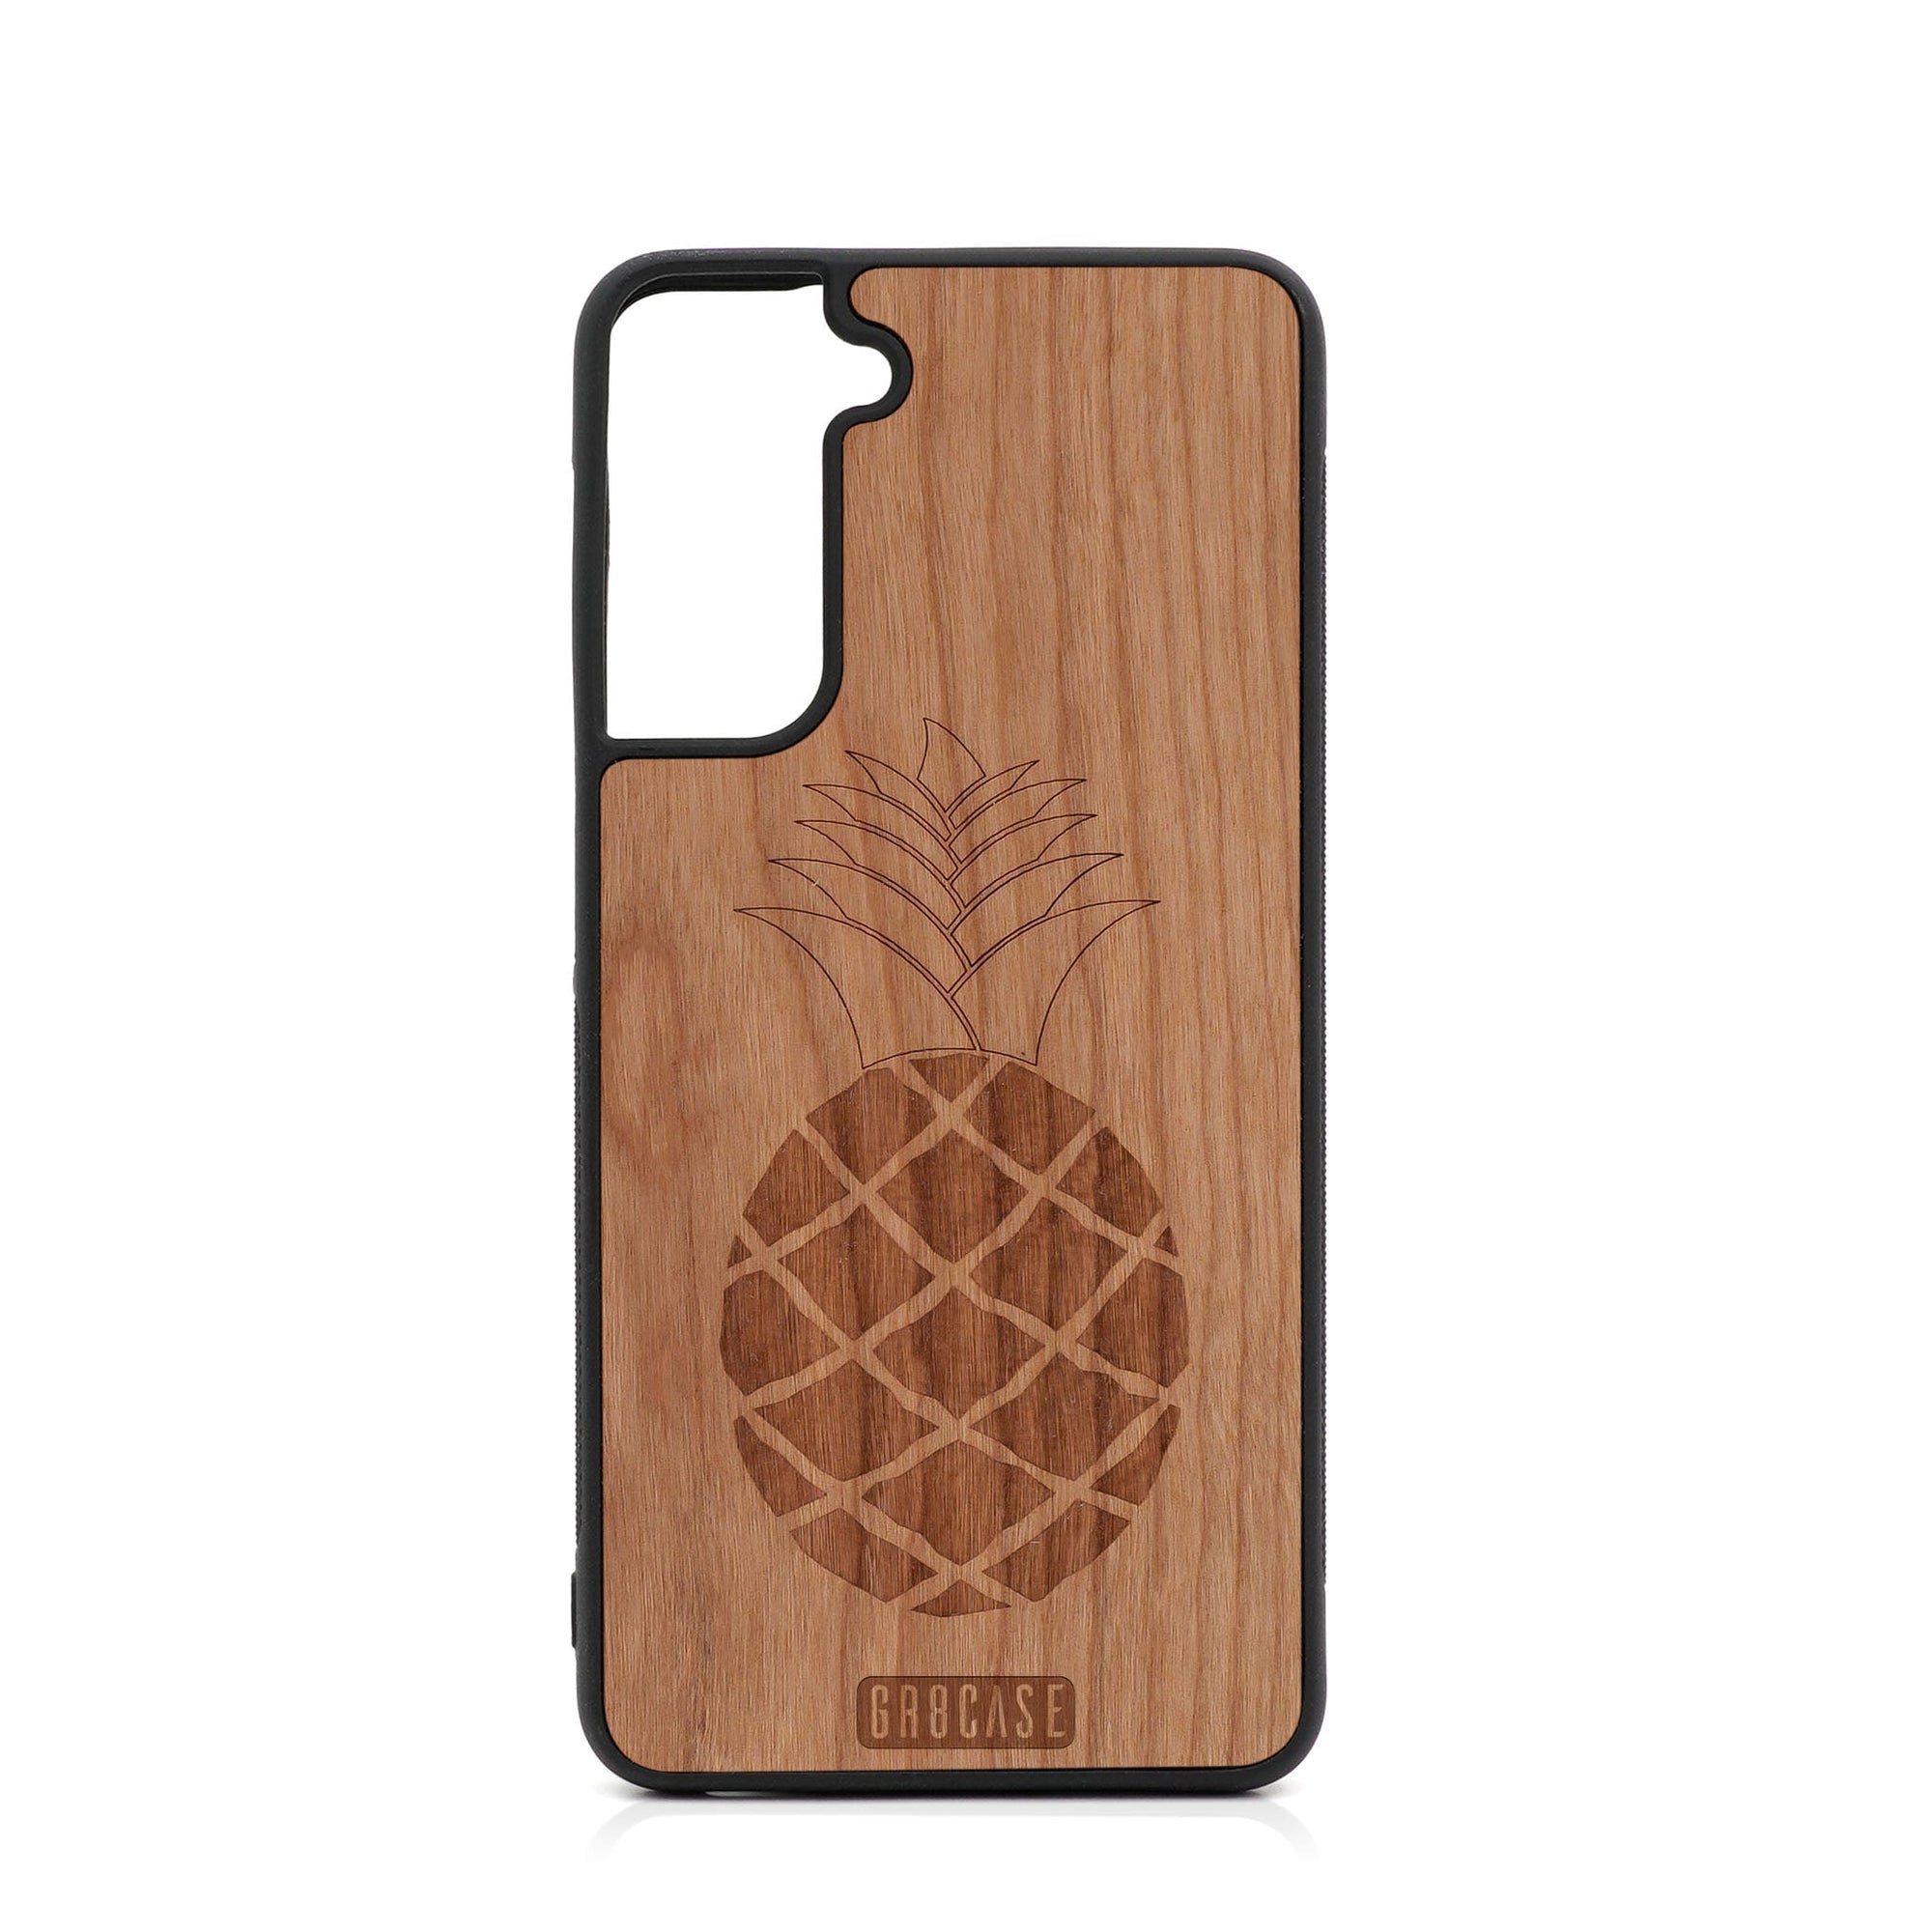 Pineapple Design Wood Case For Samsung Galaxy S21 FE 5G